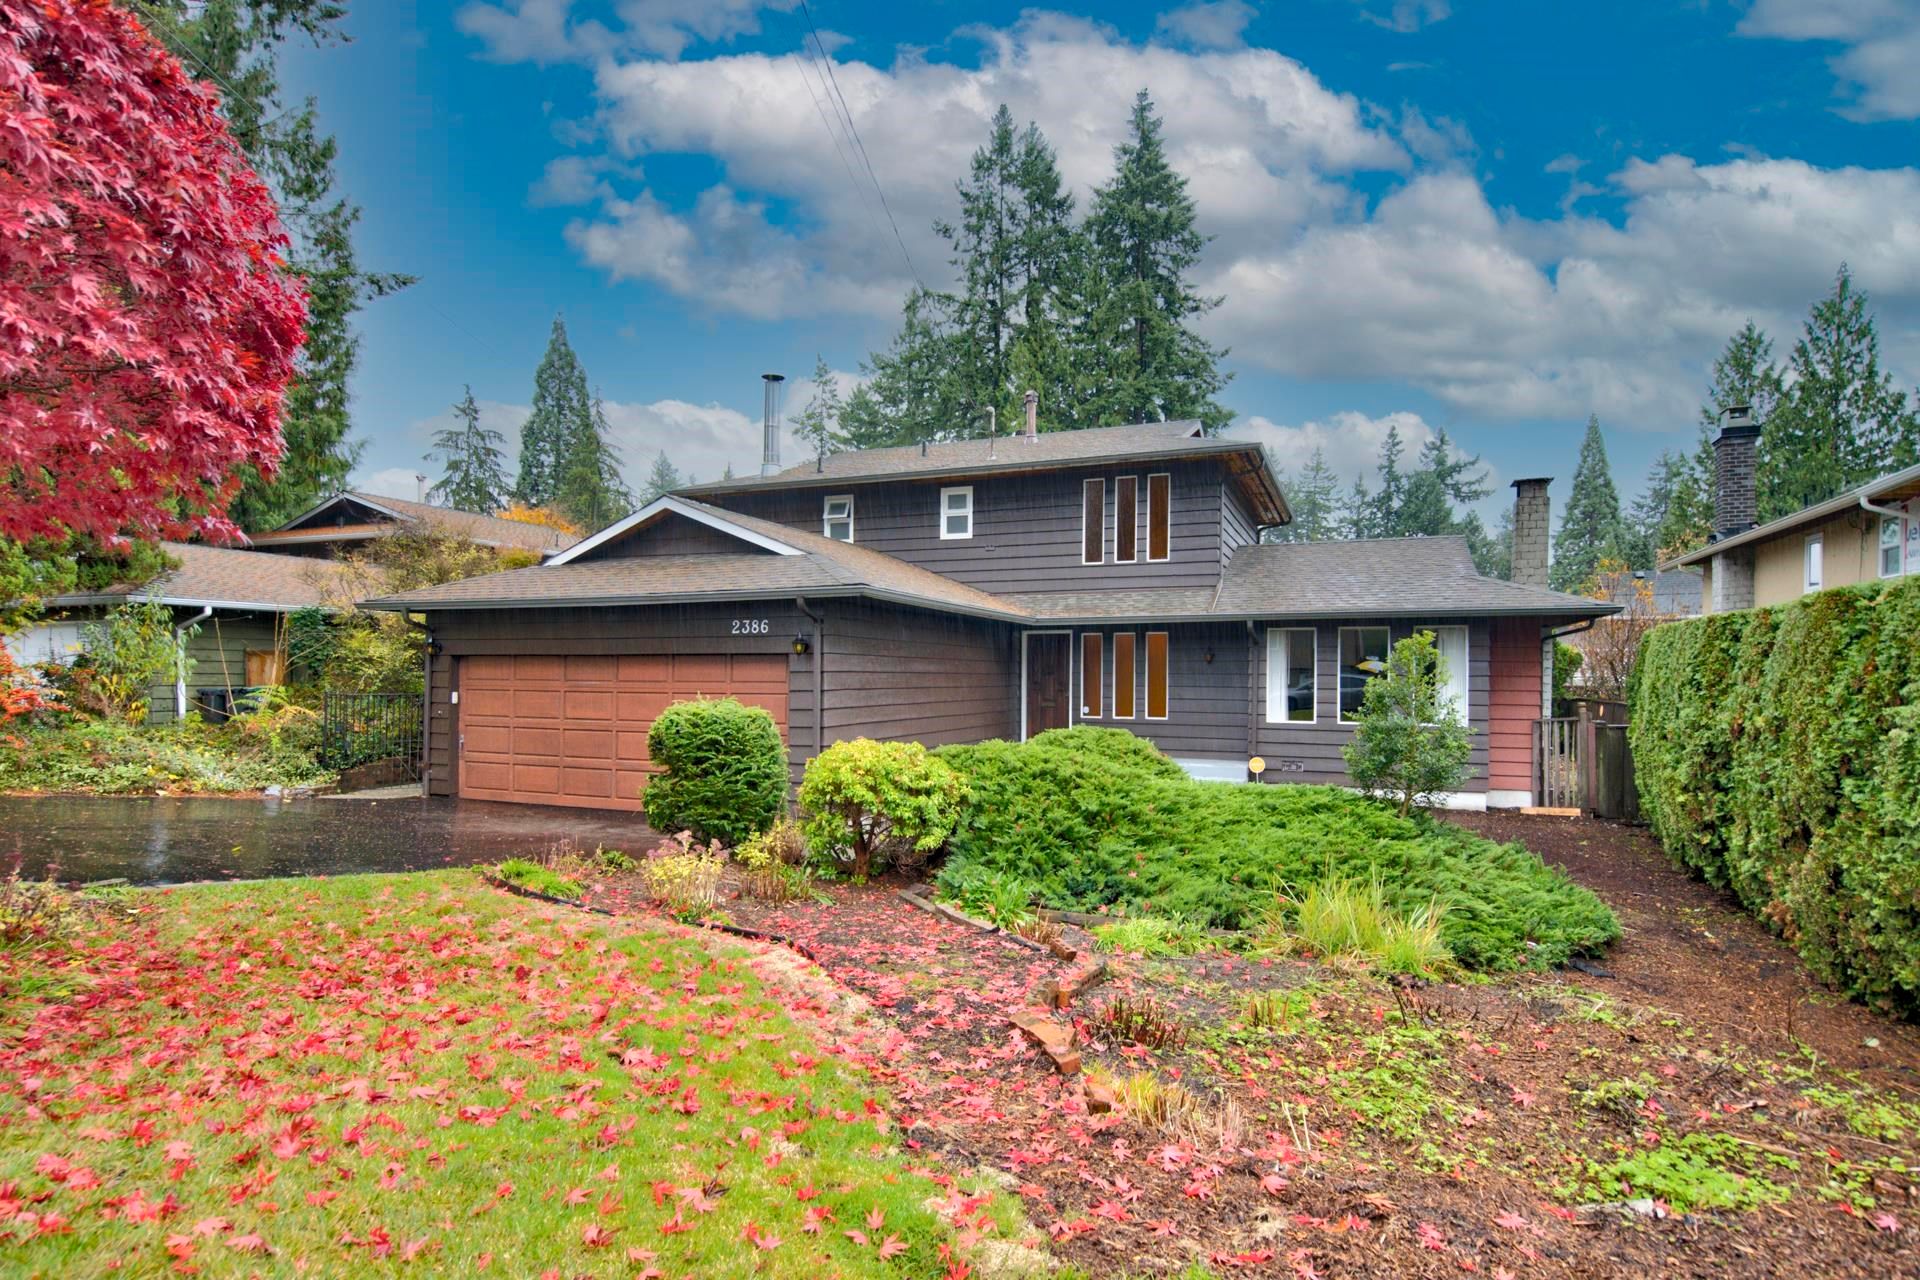 Main Photo: 2386 TOLMIE Avenue in Coquitlam: Central Coquitlam House for sale : MLS®# R2631834